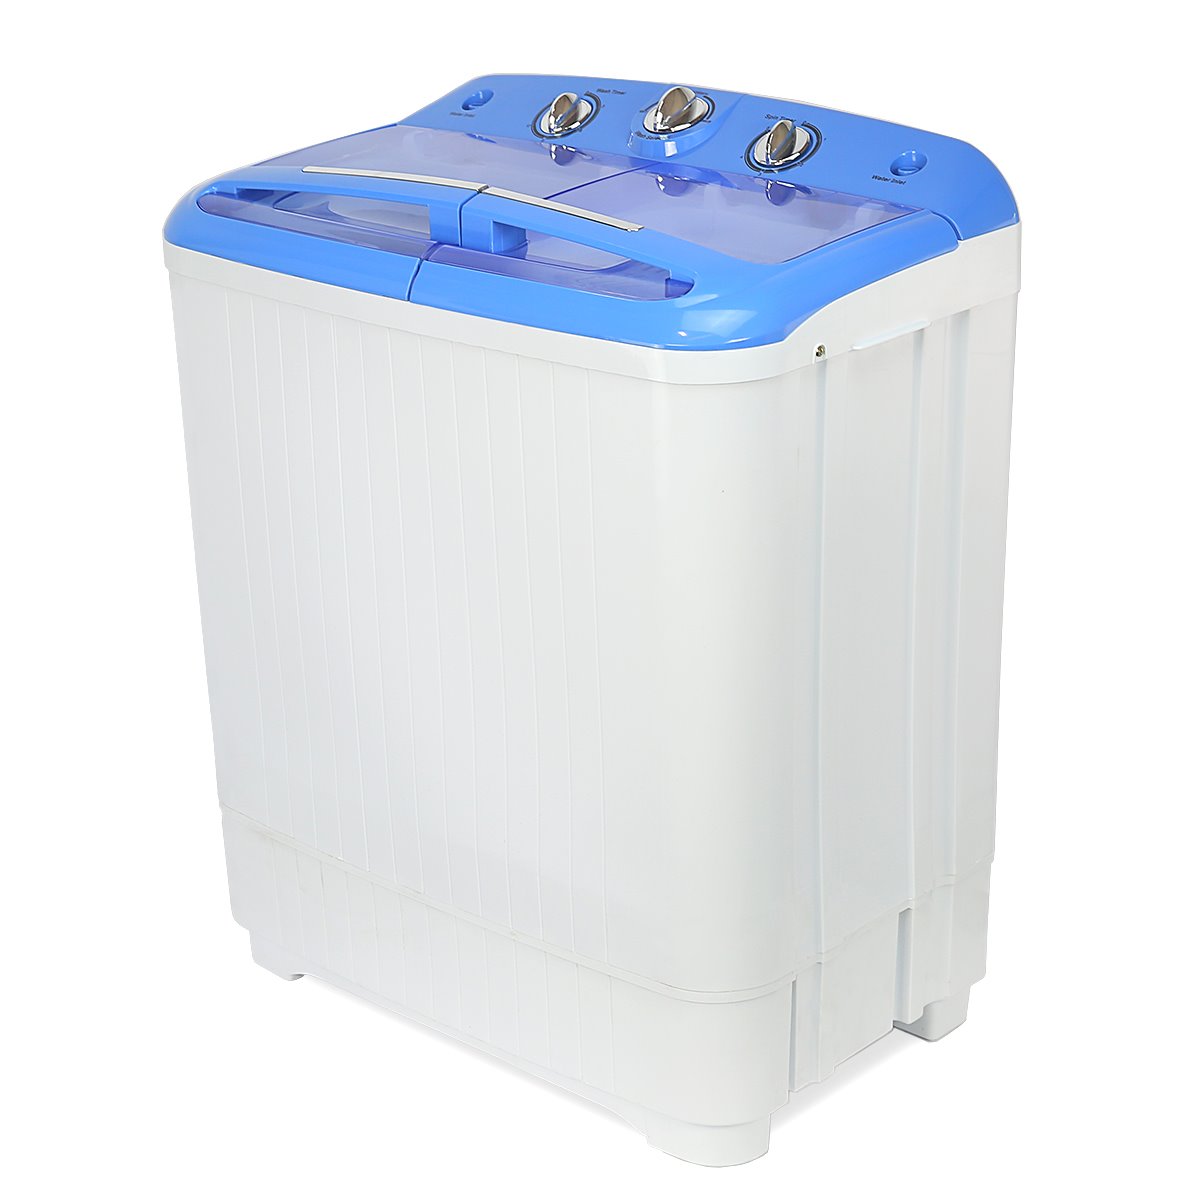 Buy ARLIME Portable Washing Machine Twin Tub 18lbs Capacity Washer and  Dryer Combo Compact Mini Washer (11lbs) & Spin Dryer (7lbs) Sets for  Apartments,Dorms,Bathroom or RV Camping Online in Vietnam. B0899K884D